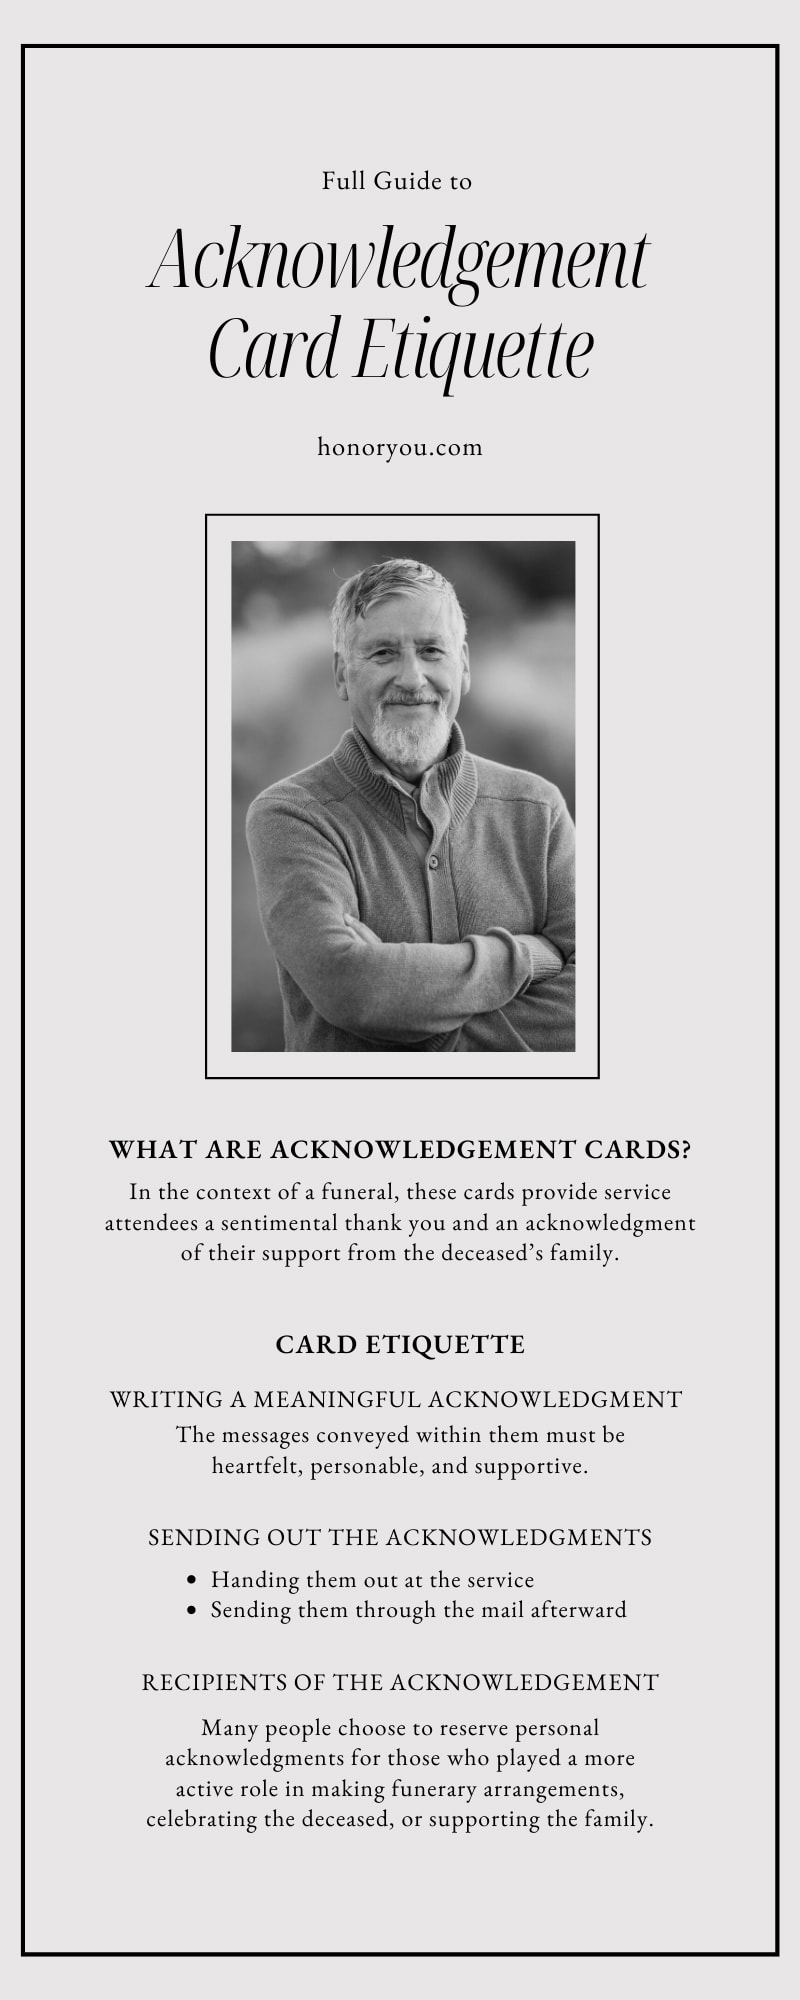 Full Guide to Acknowledgement Card Etiquette
